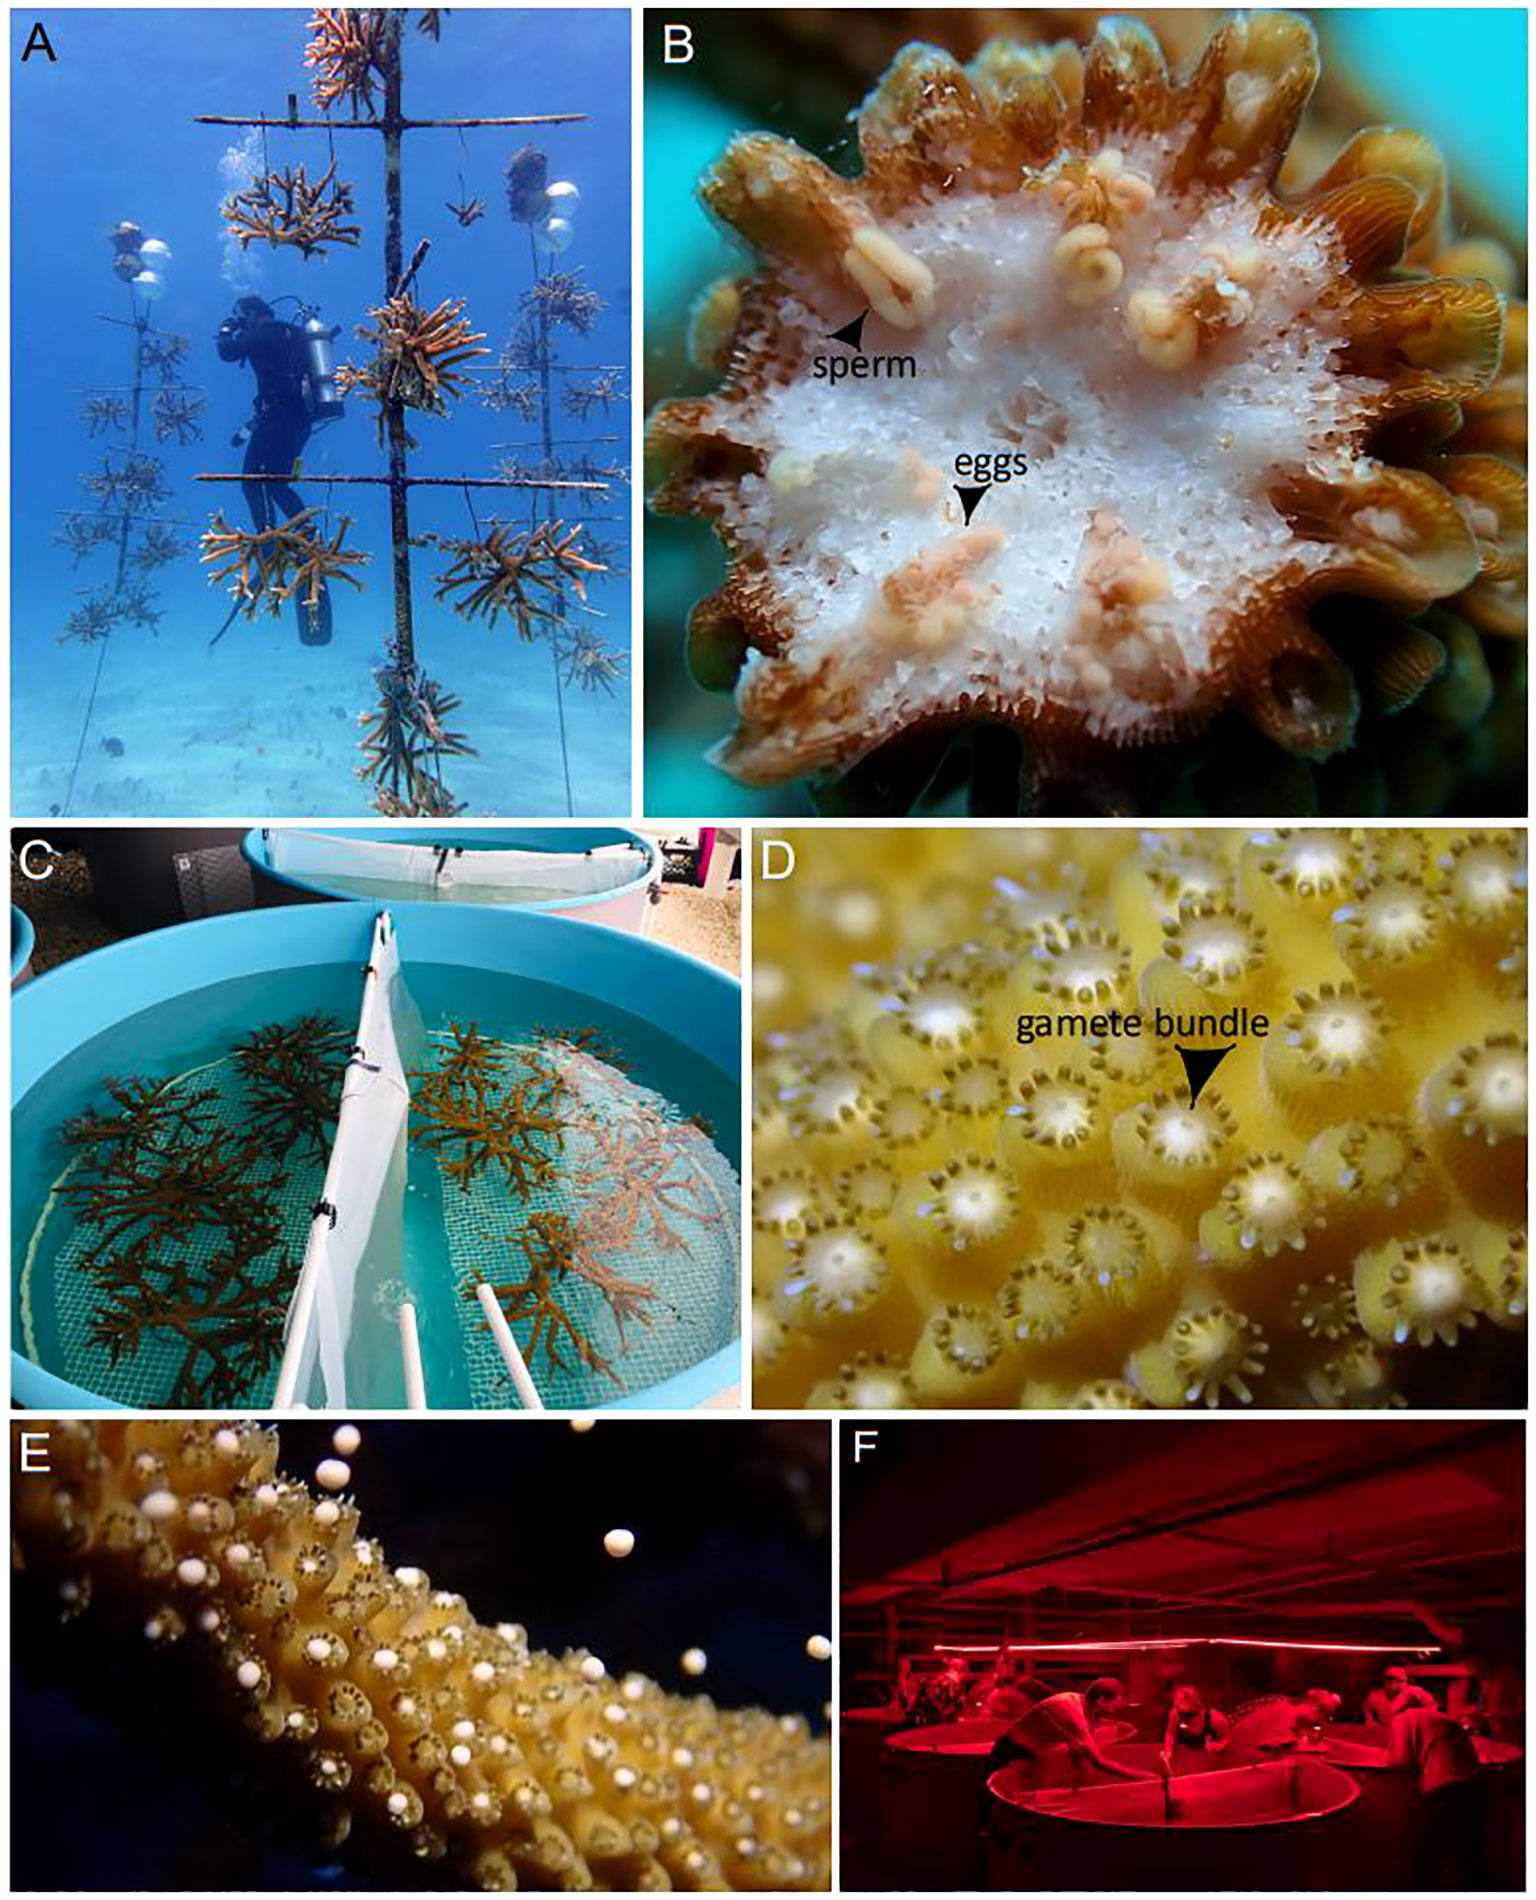 How to Care for Acropora Corals - My Reef